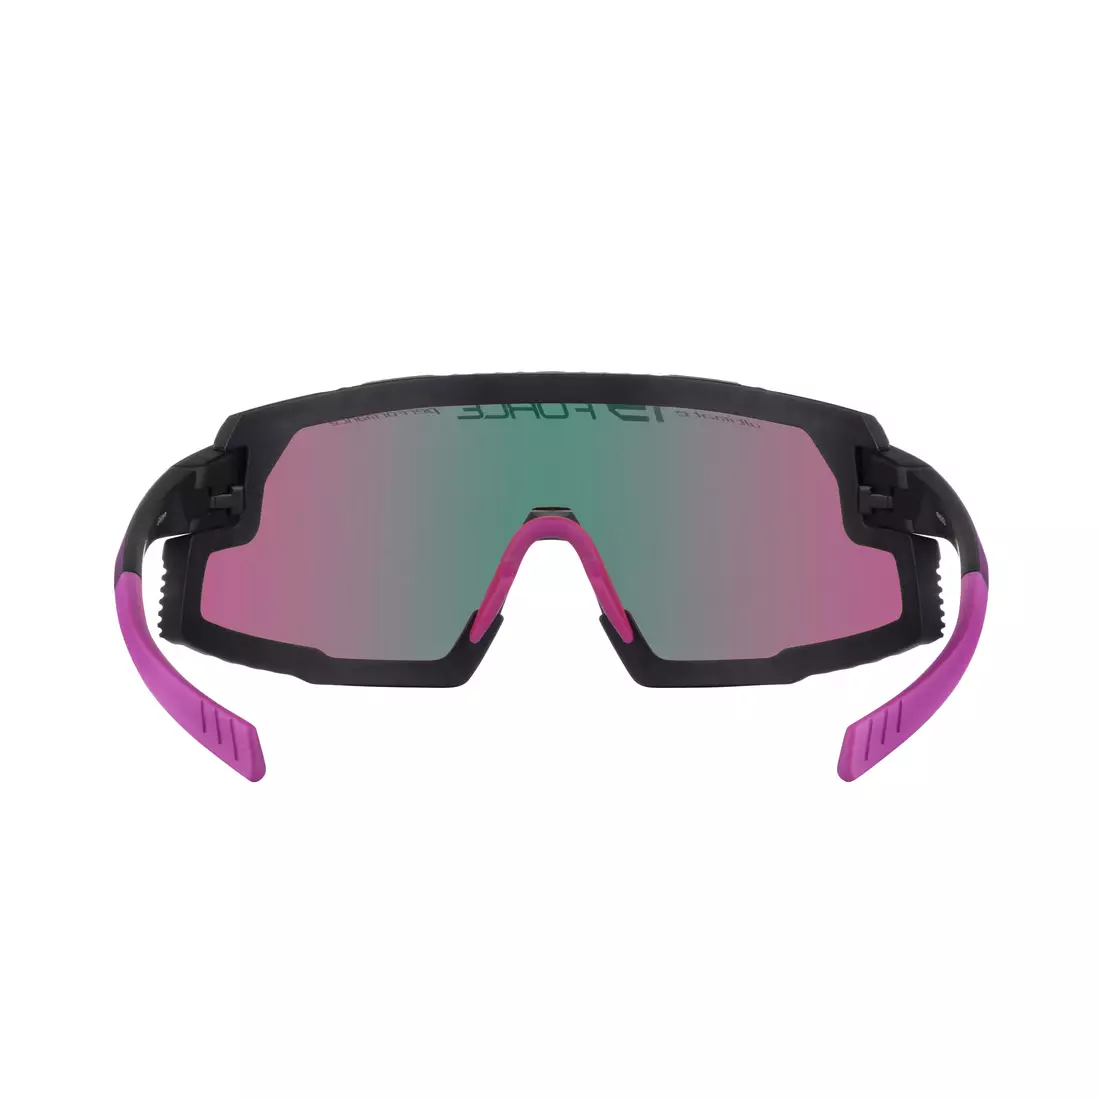 FORCE GRIP Sports glasses, purple REVO lenses, black and pink